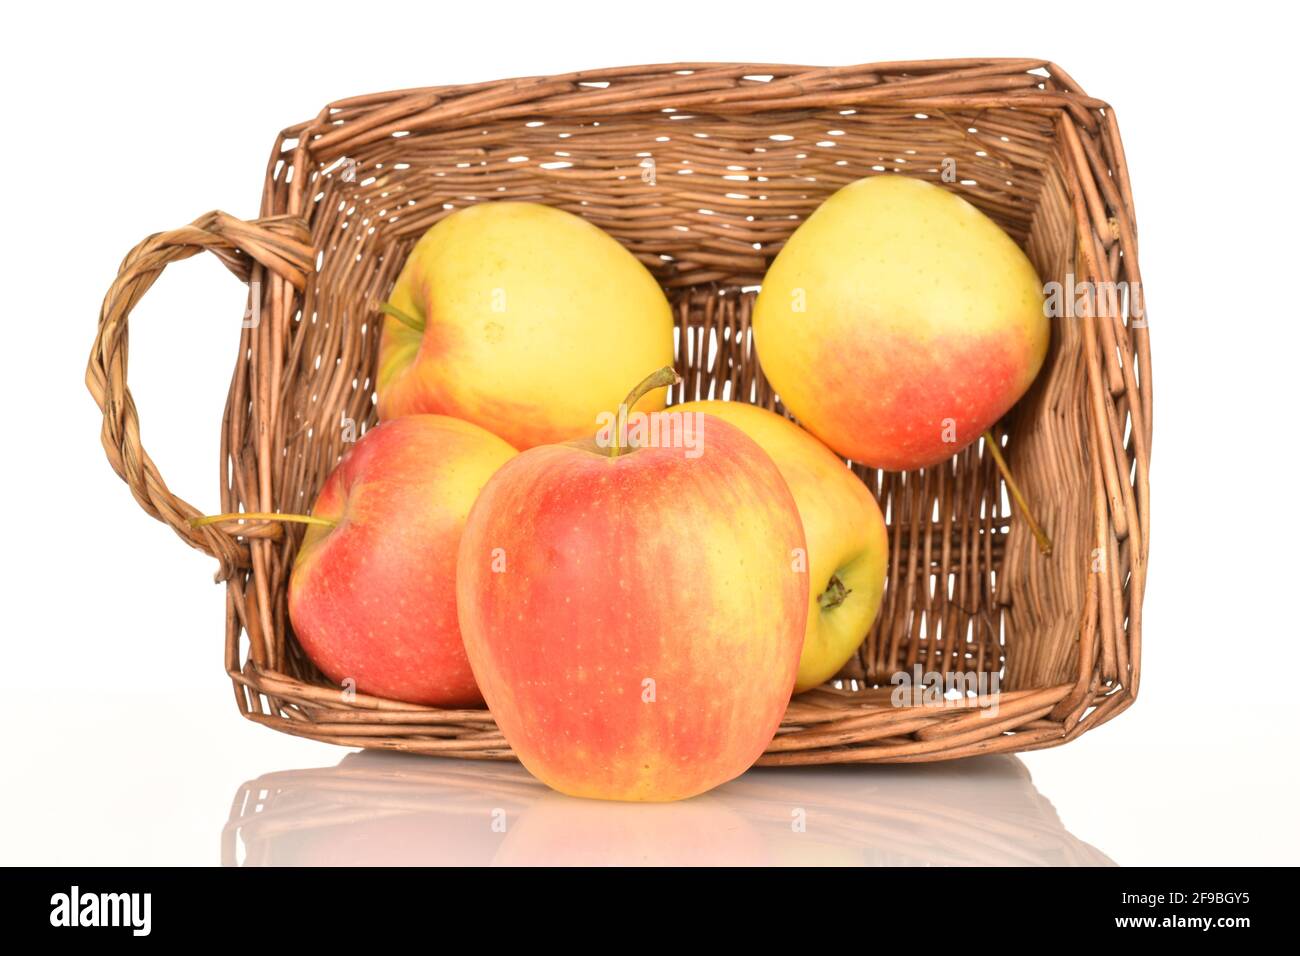 Two ripe organic, juicy, aromatic apples in a wicker basket of vines, close-up. Stock Photo